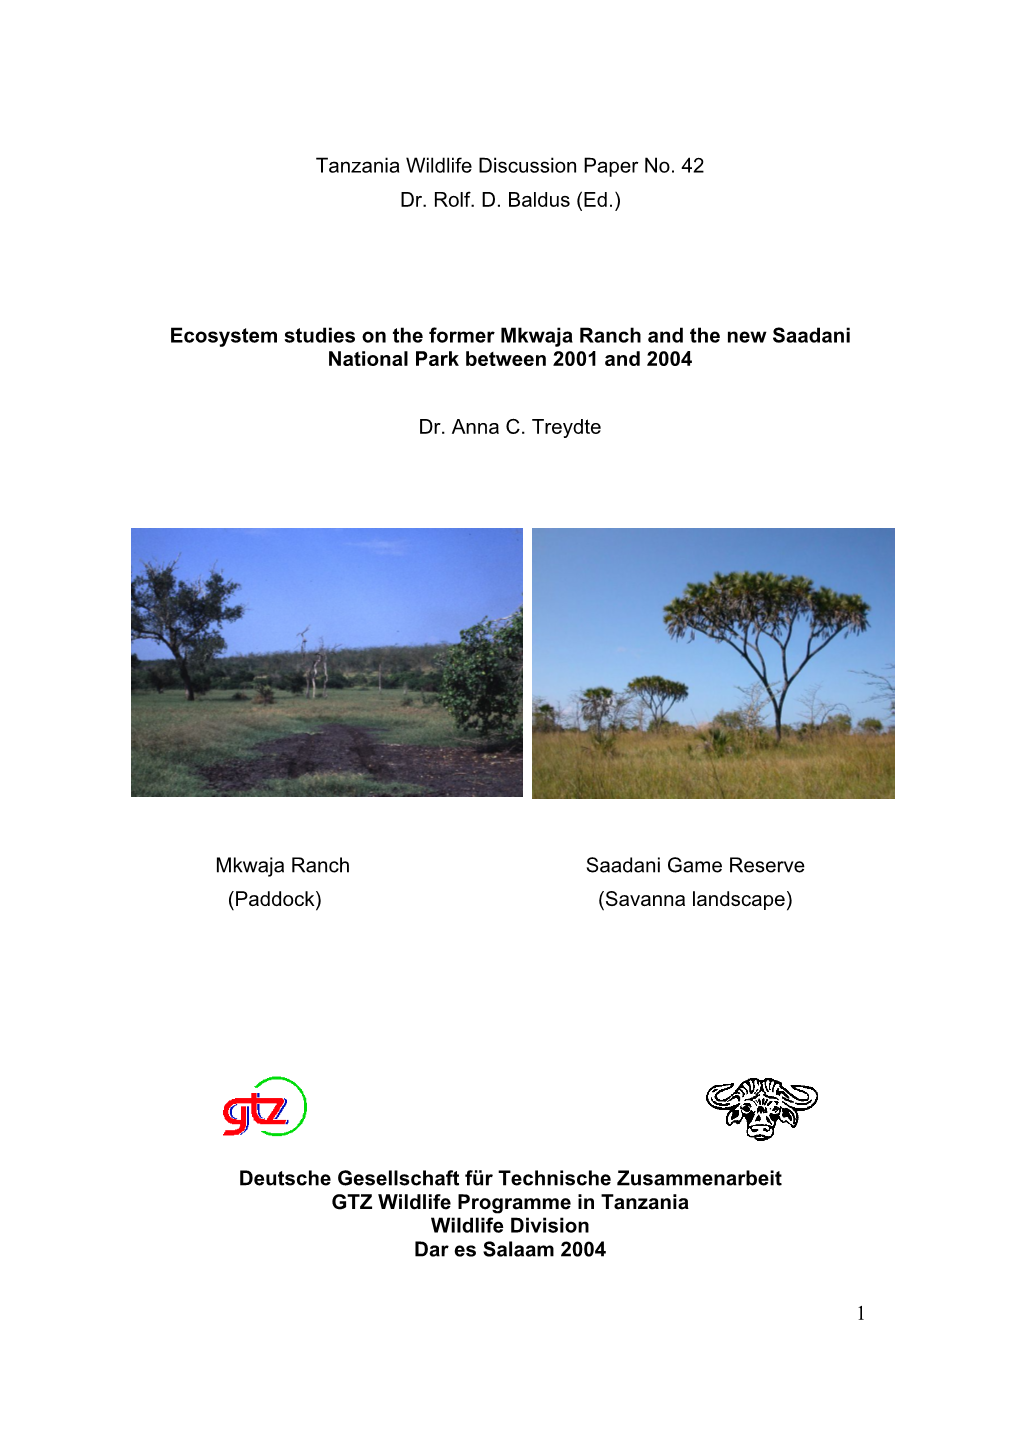 Ecosystem Studies on the Former Mkwaja Ranch and the New Saadani National Park Between 2001 and 2004